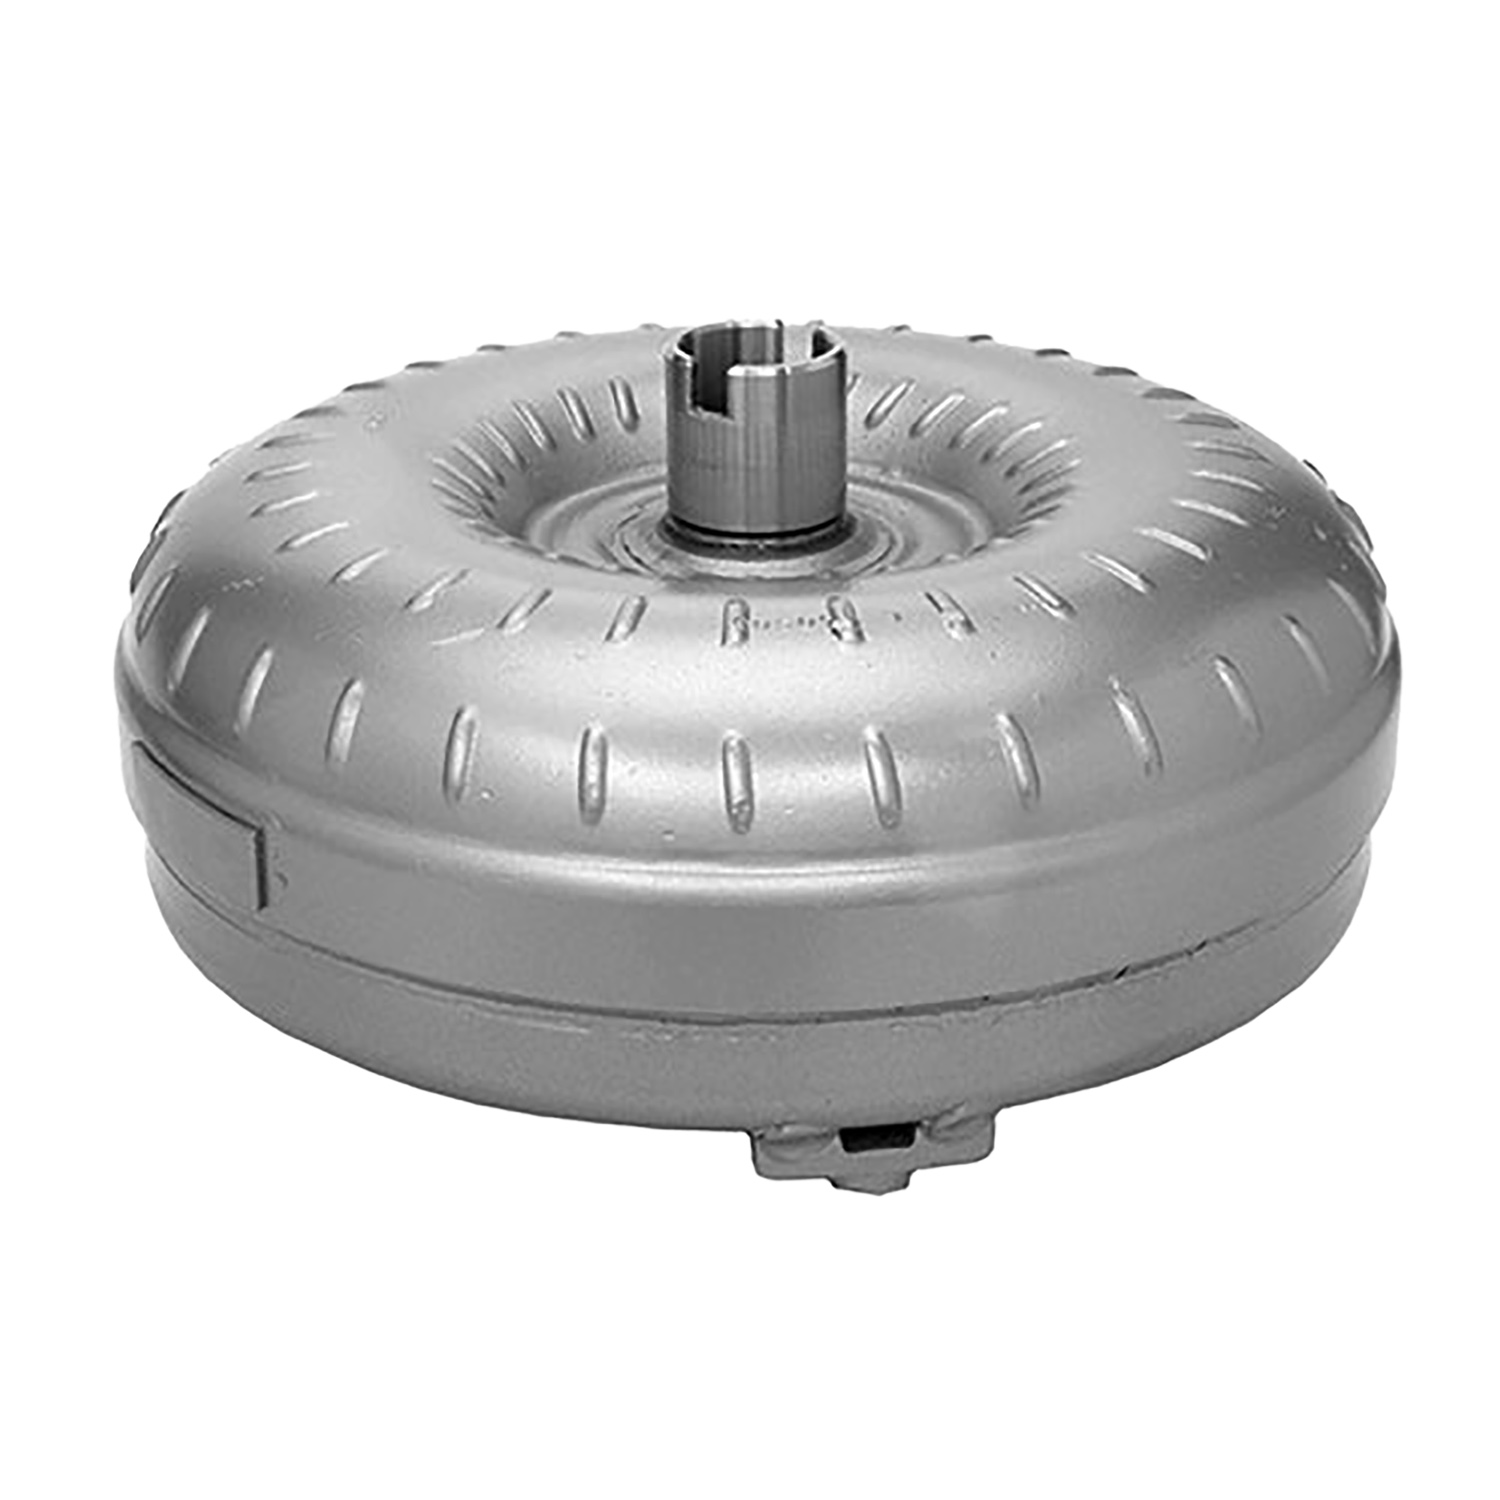 Remanufactured Automatic Transmission Torque Converter for GM TH700R4/4L60 No Cltch